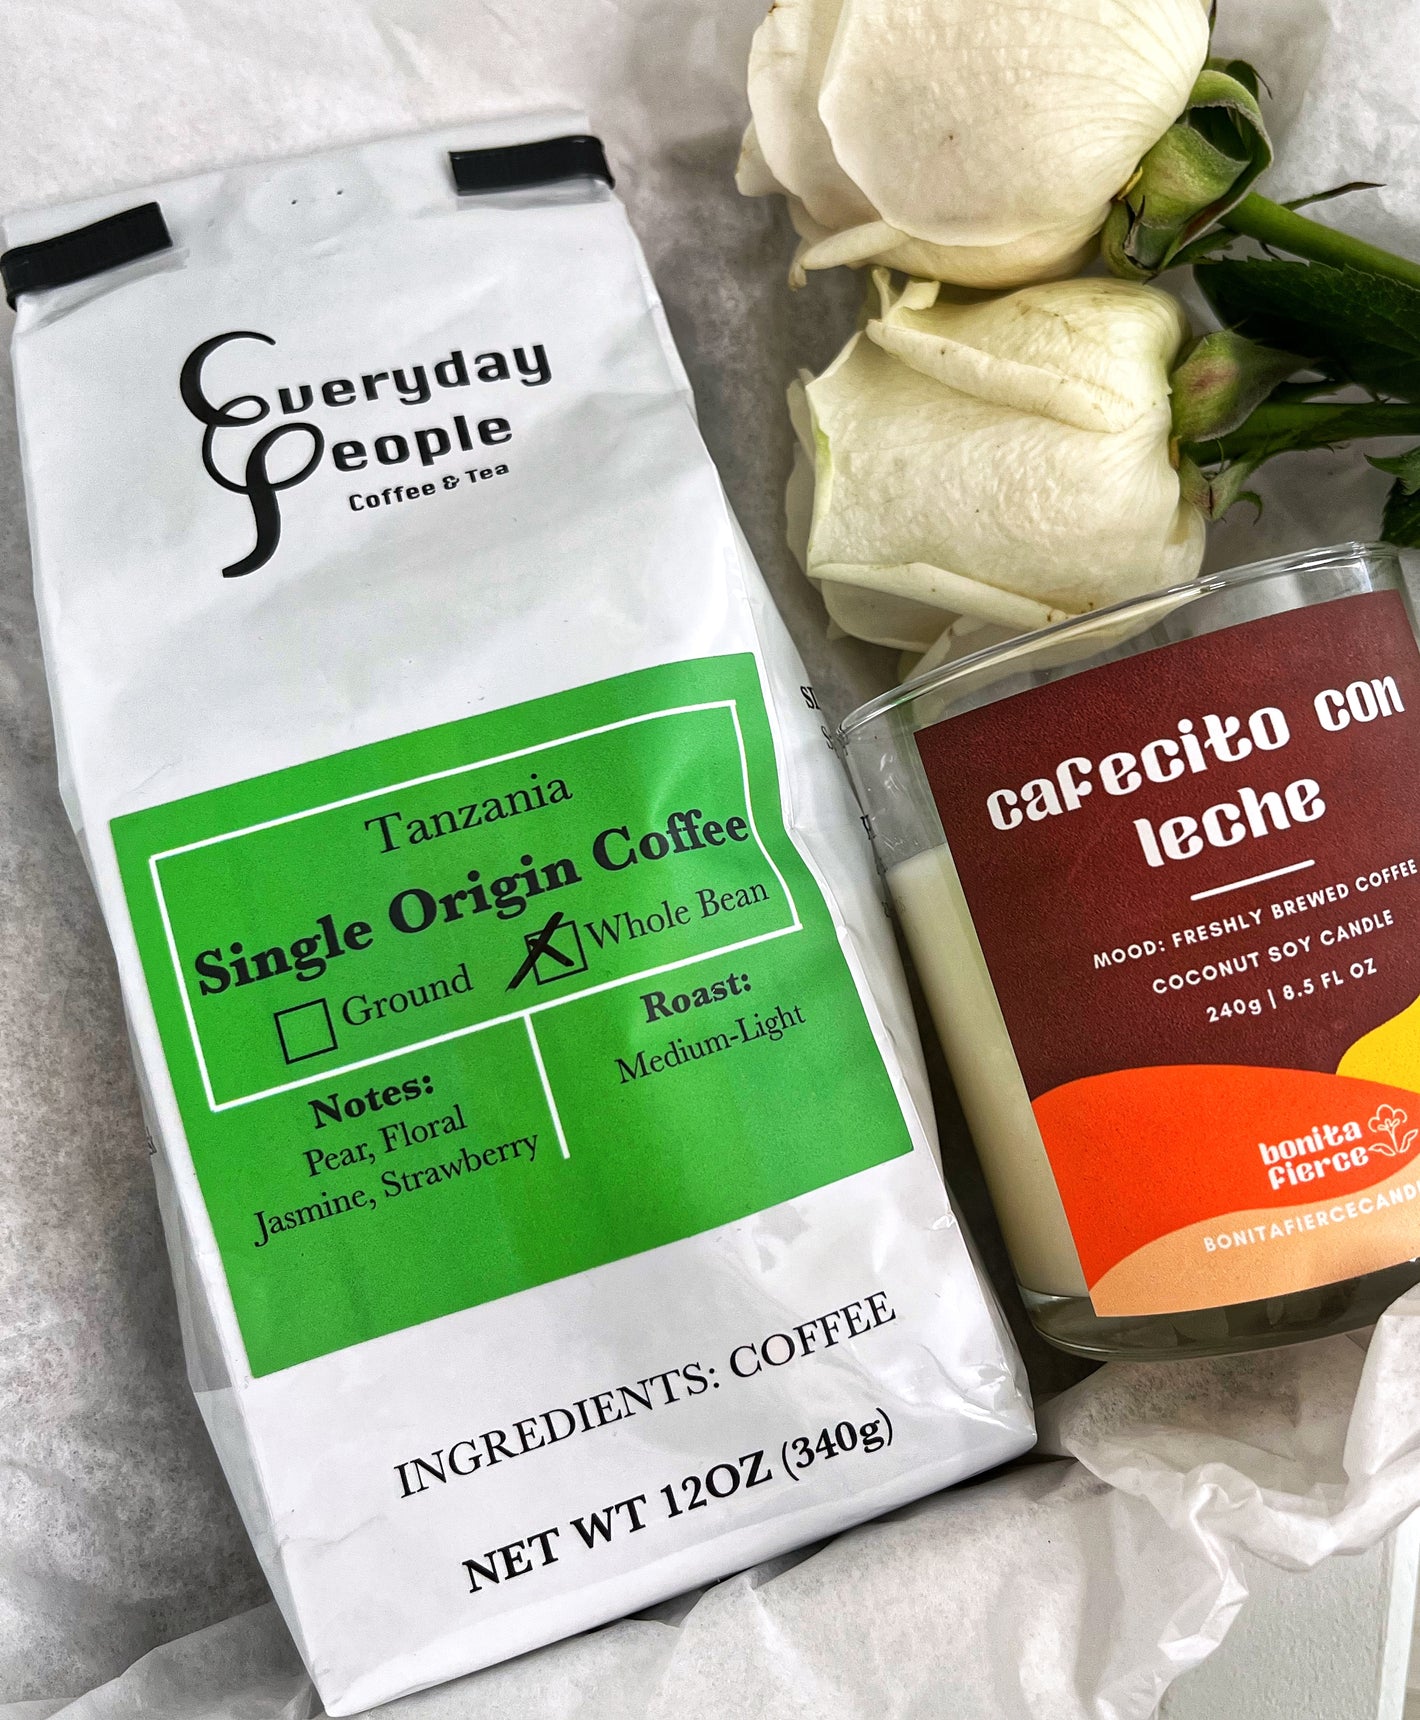 Products within Sueños Coffee Co's morning cafecito box. Pictured is a bag of specialty coffee from Everyday People Coffee & Tea, a Cafecito con Leche candle from Bonita Fierce and two white roses. 